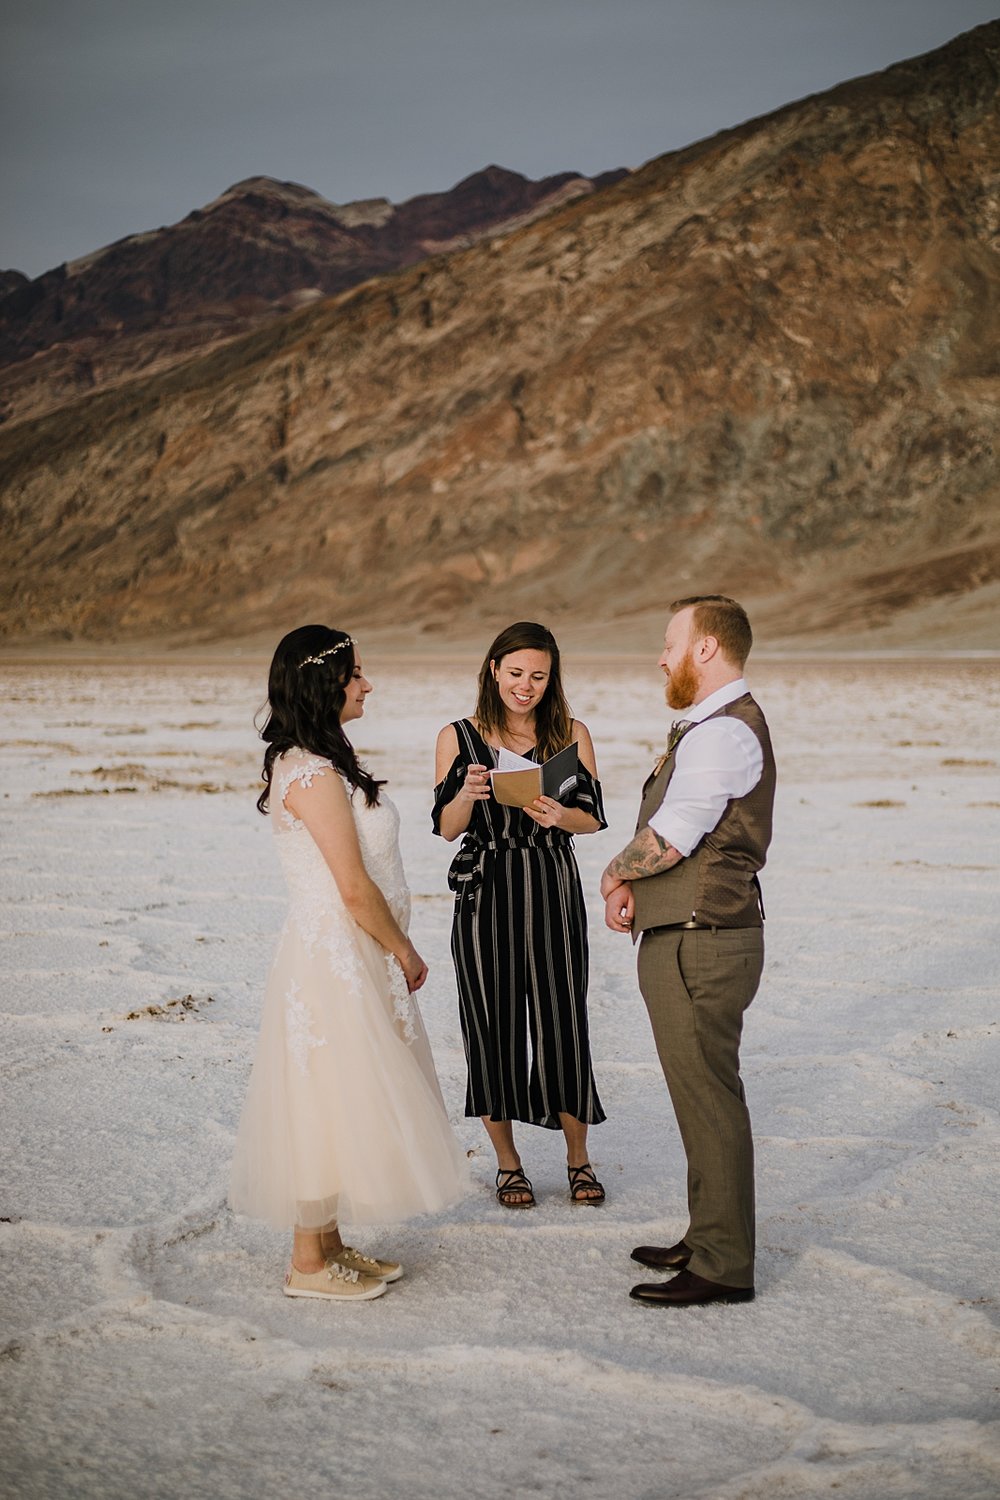 couple eloping on salt flats, death valley national park elopement, elope in death valley, badwater basin elopement, hiking in death valley national park, sunset at badwater basin